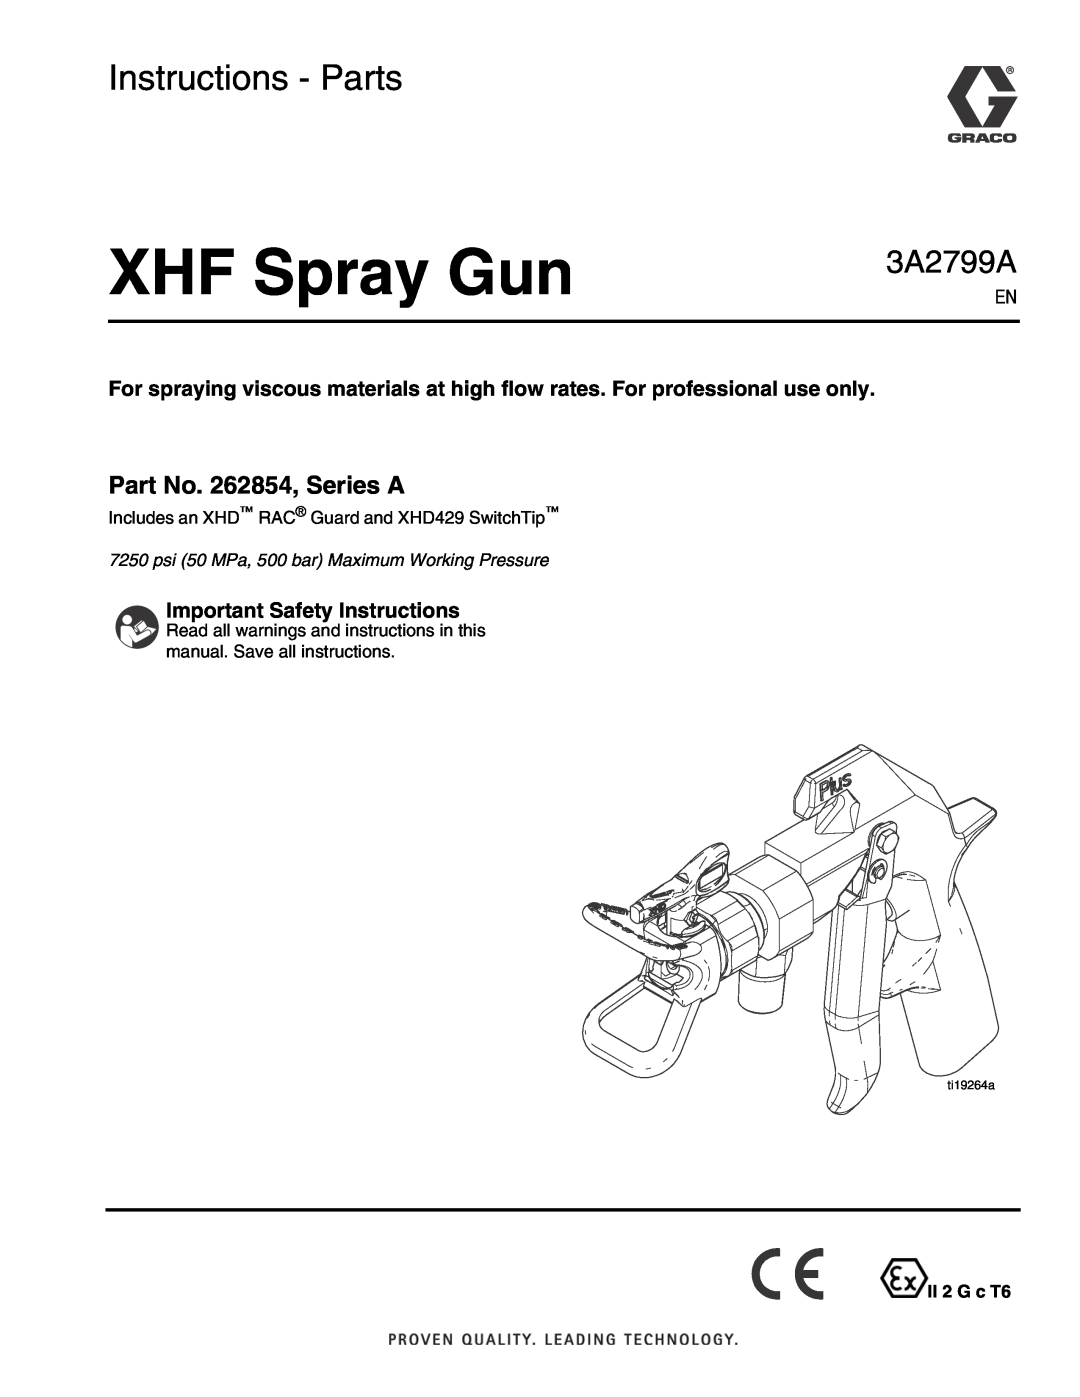 Graco 262854 important safety instructions Important Safety Instructions, XHF Spray Gun, Instructions - Parts, 3A2799A 